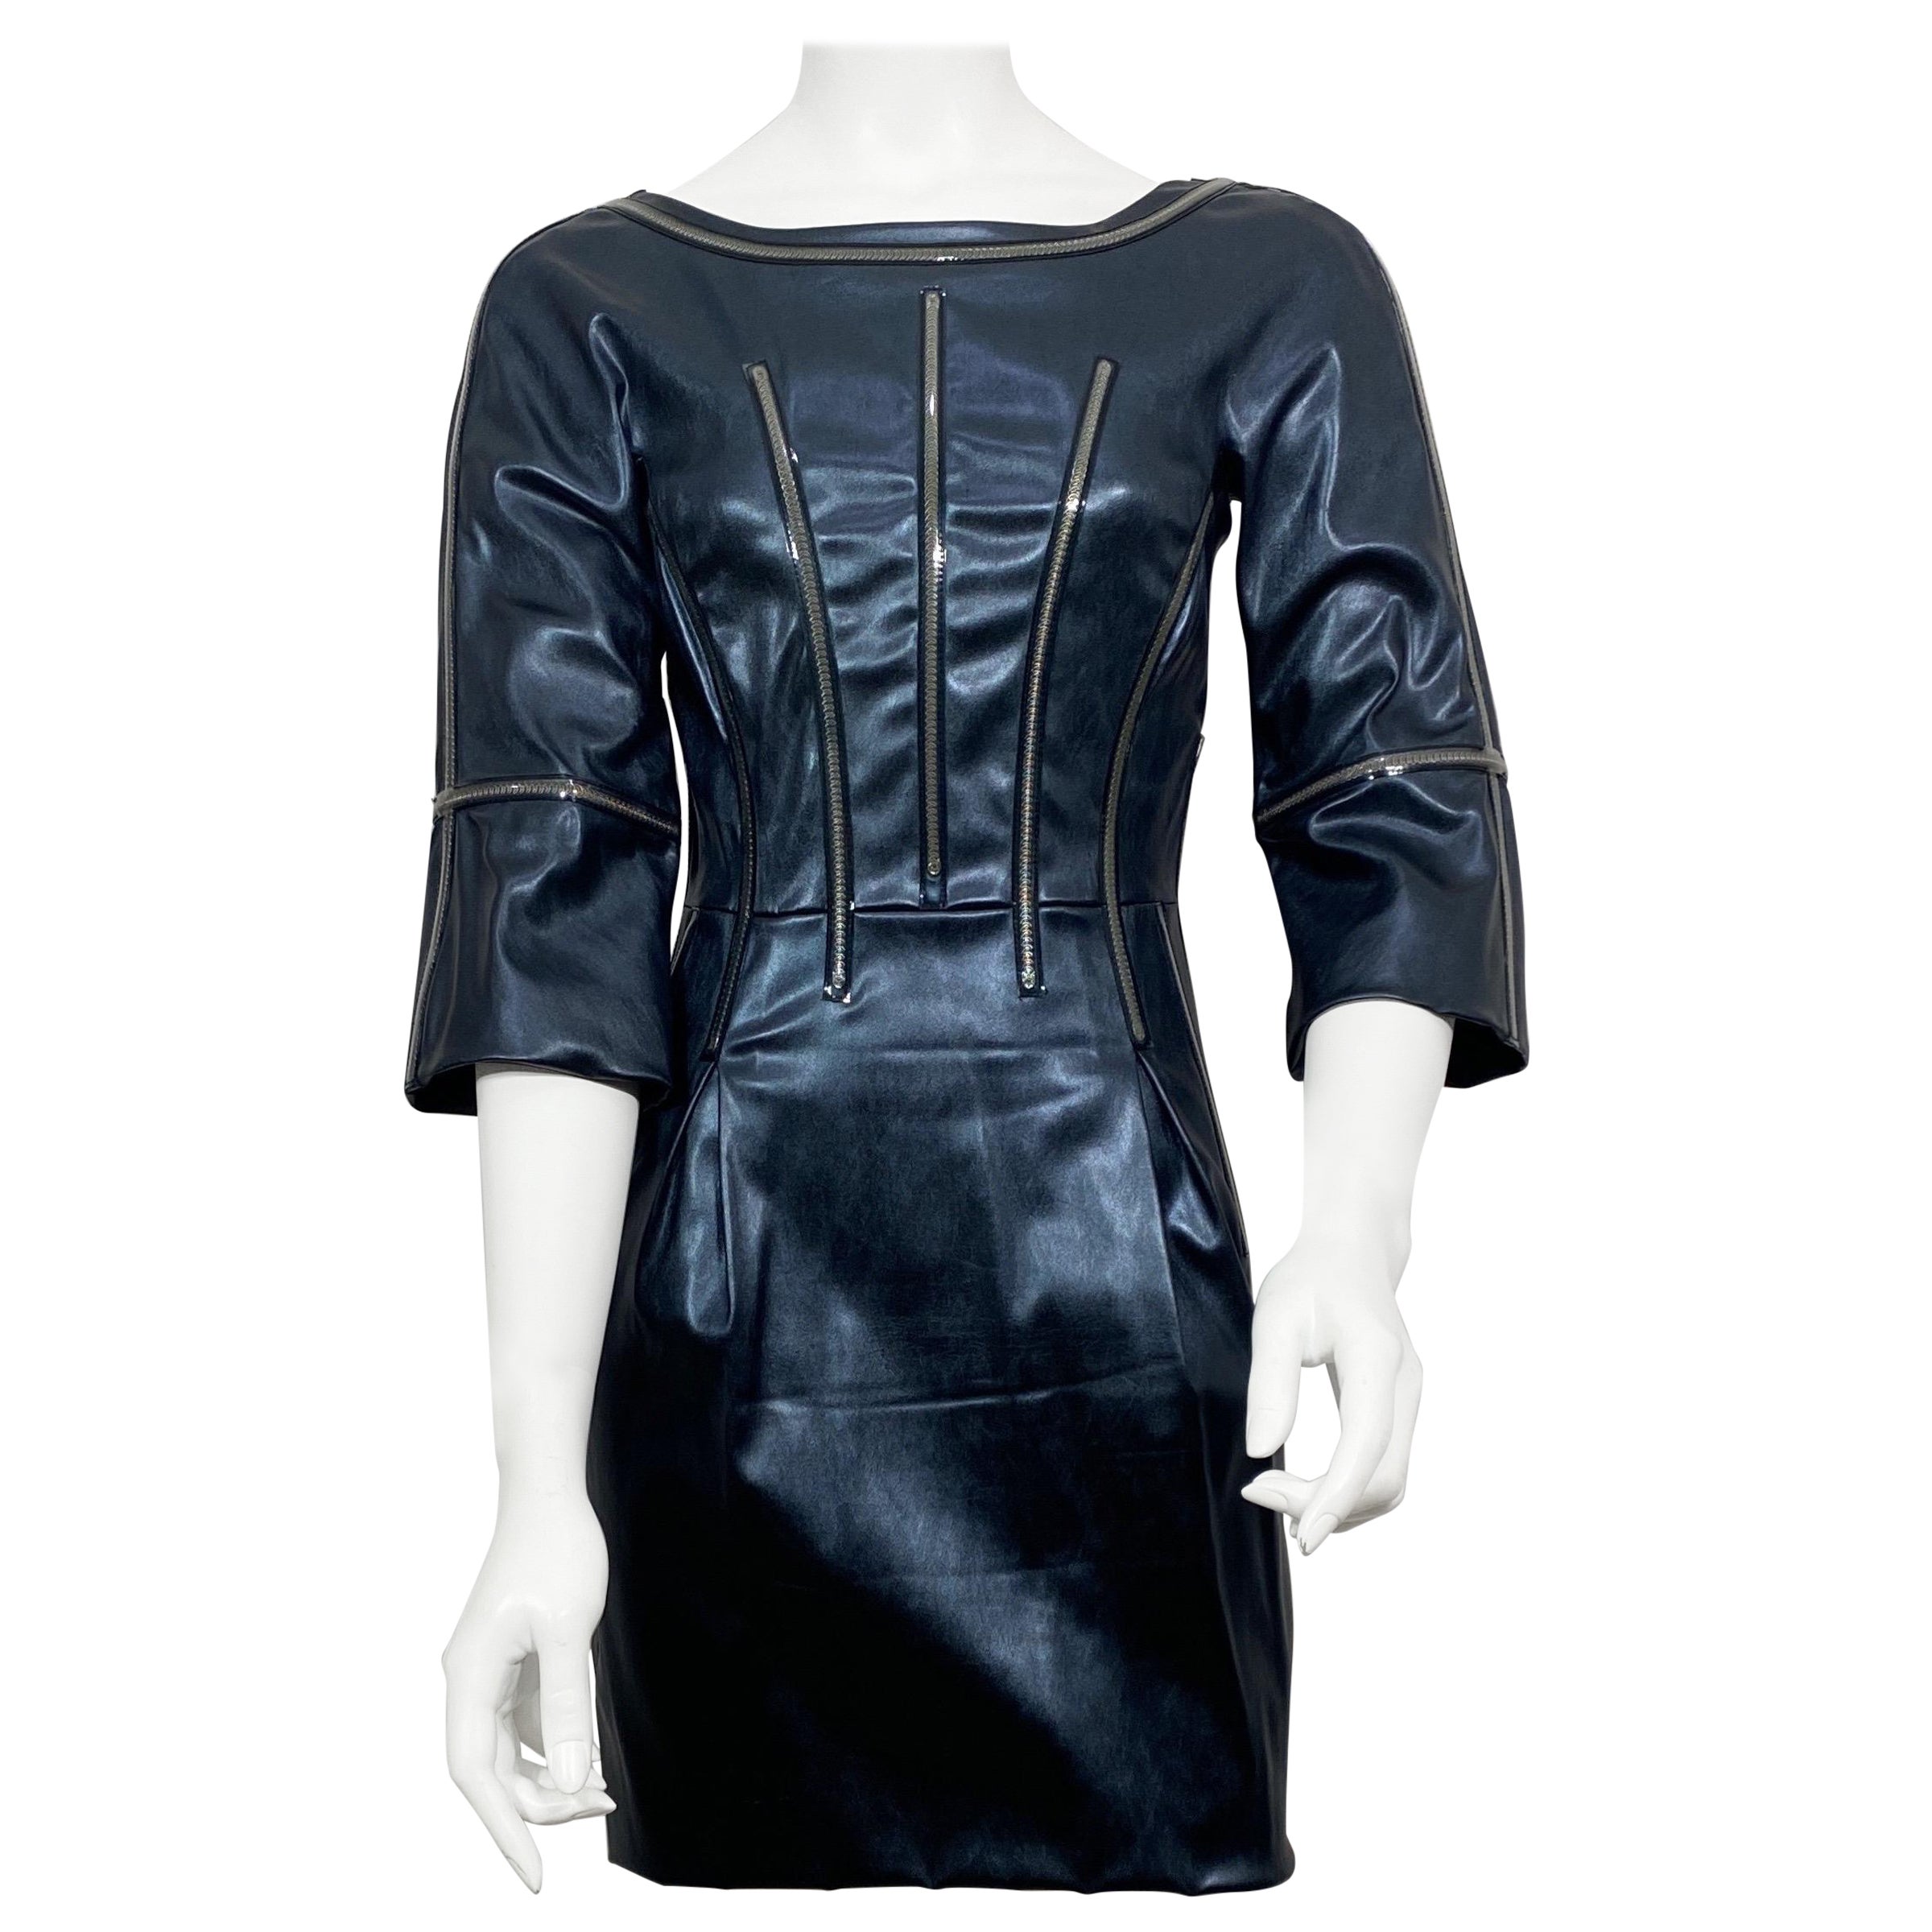 Dolce and Gabbana Runway Fall 2007 Black Metallic Leather Dress-Size 42 For Sale